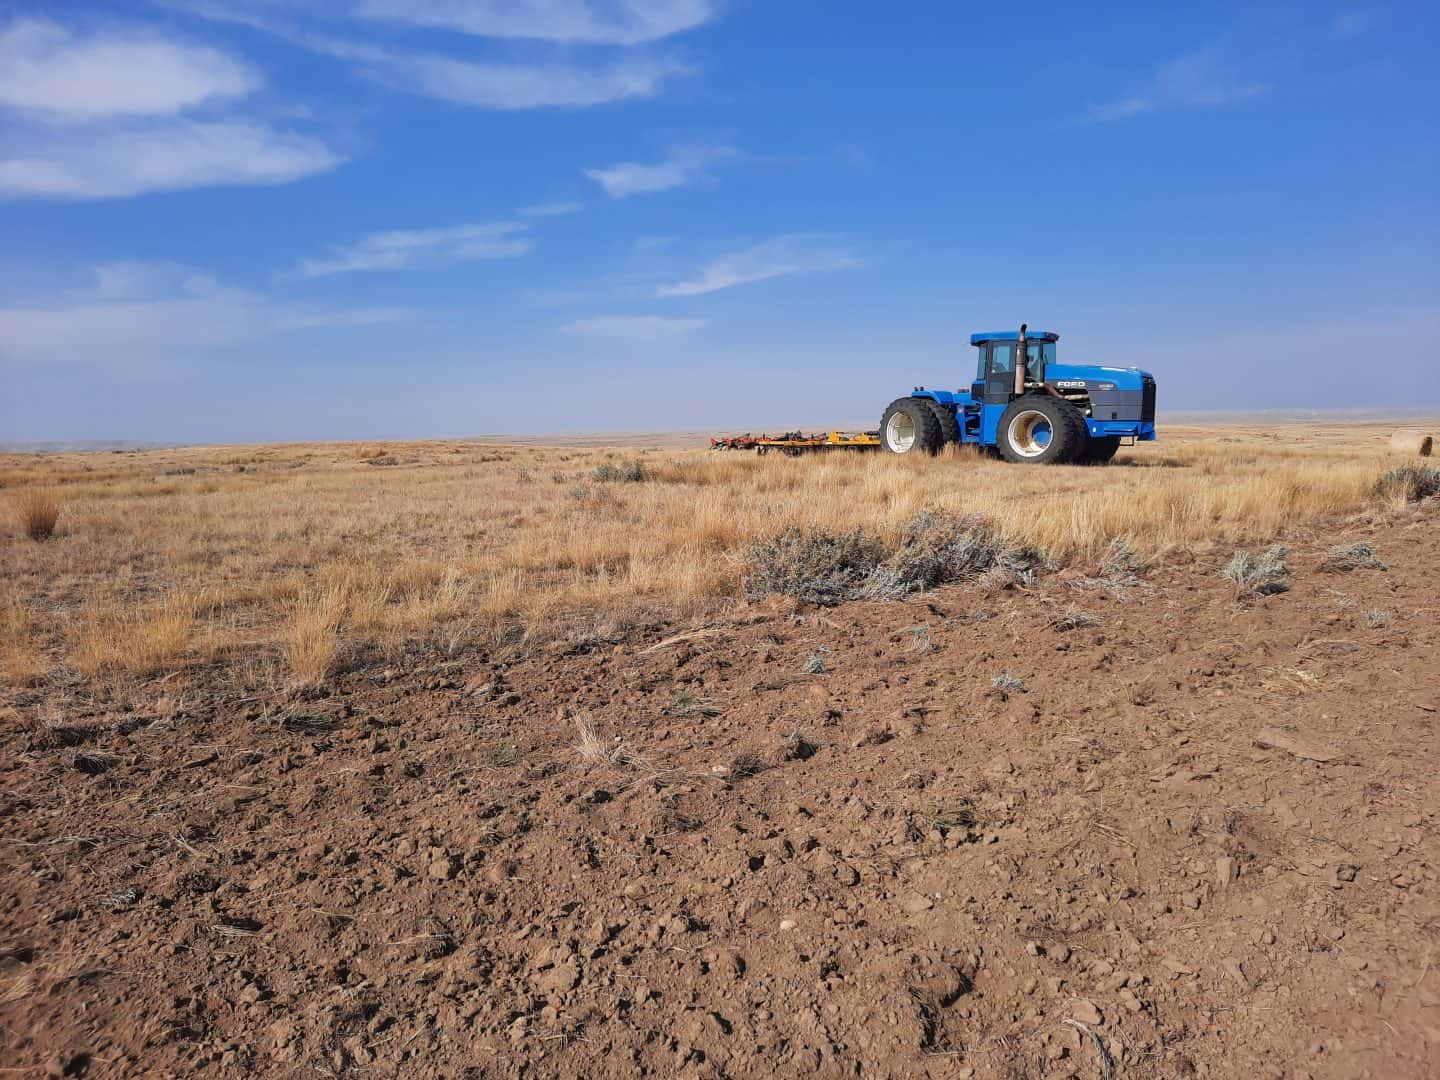 Image of tractor between plowed up field and native rangeland.